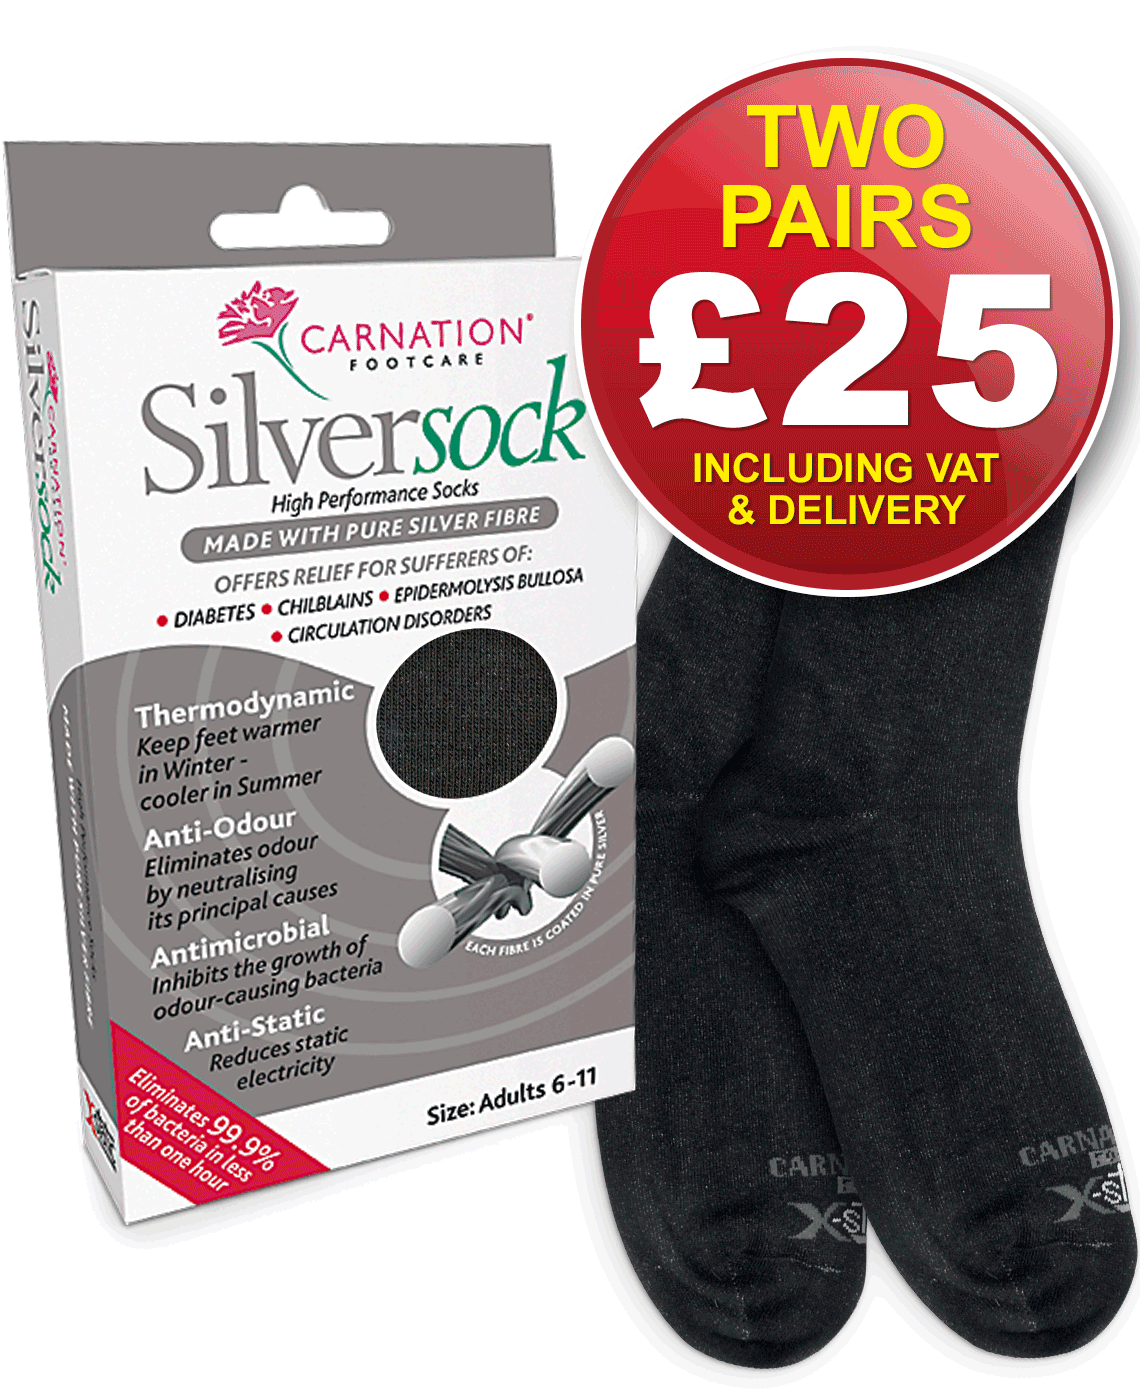 Silversock Adult Black Twopack Featured £25